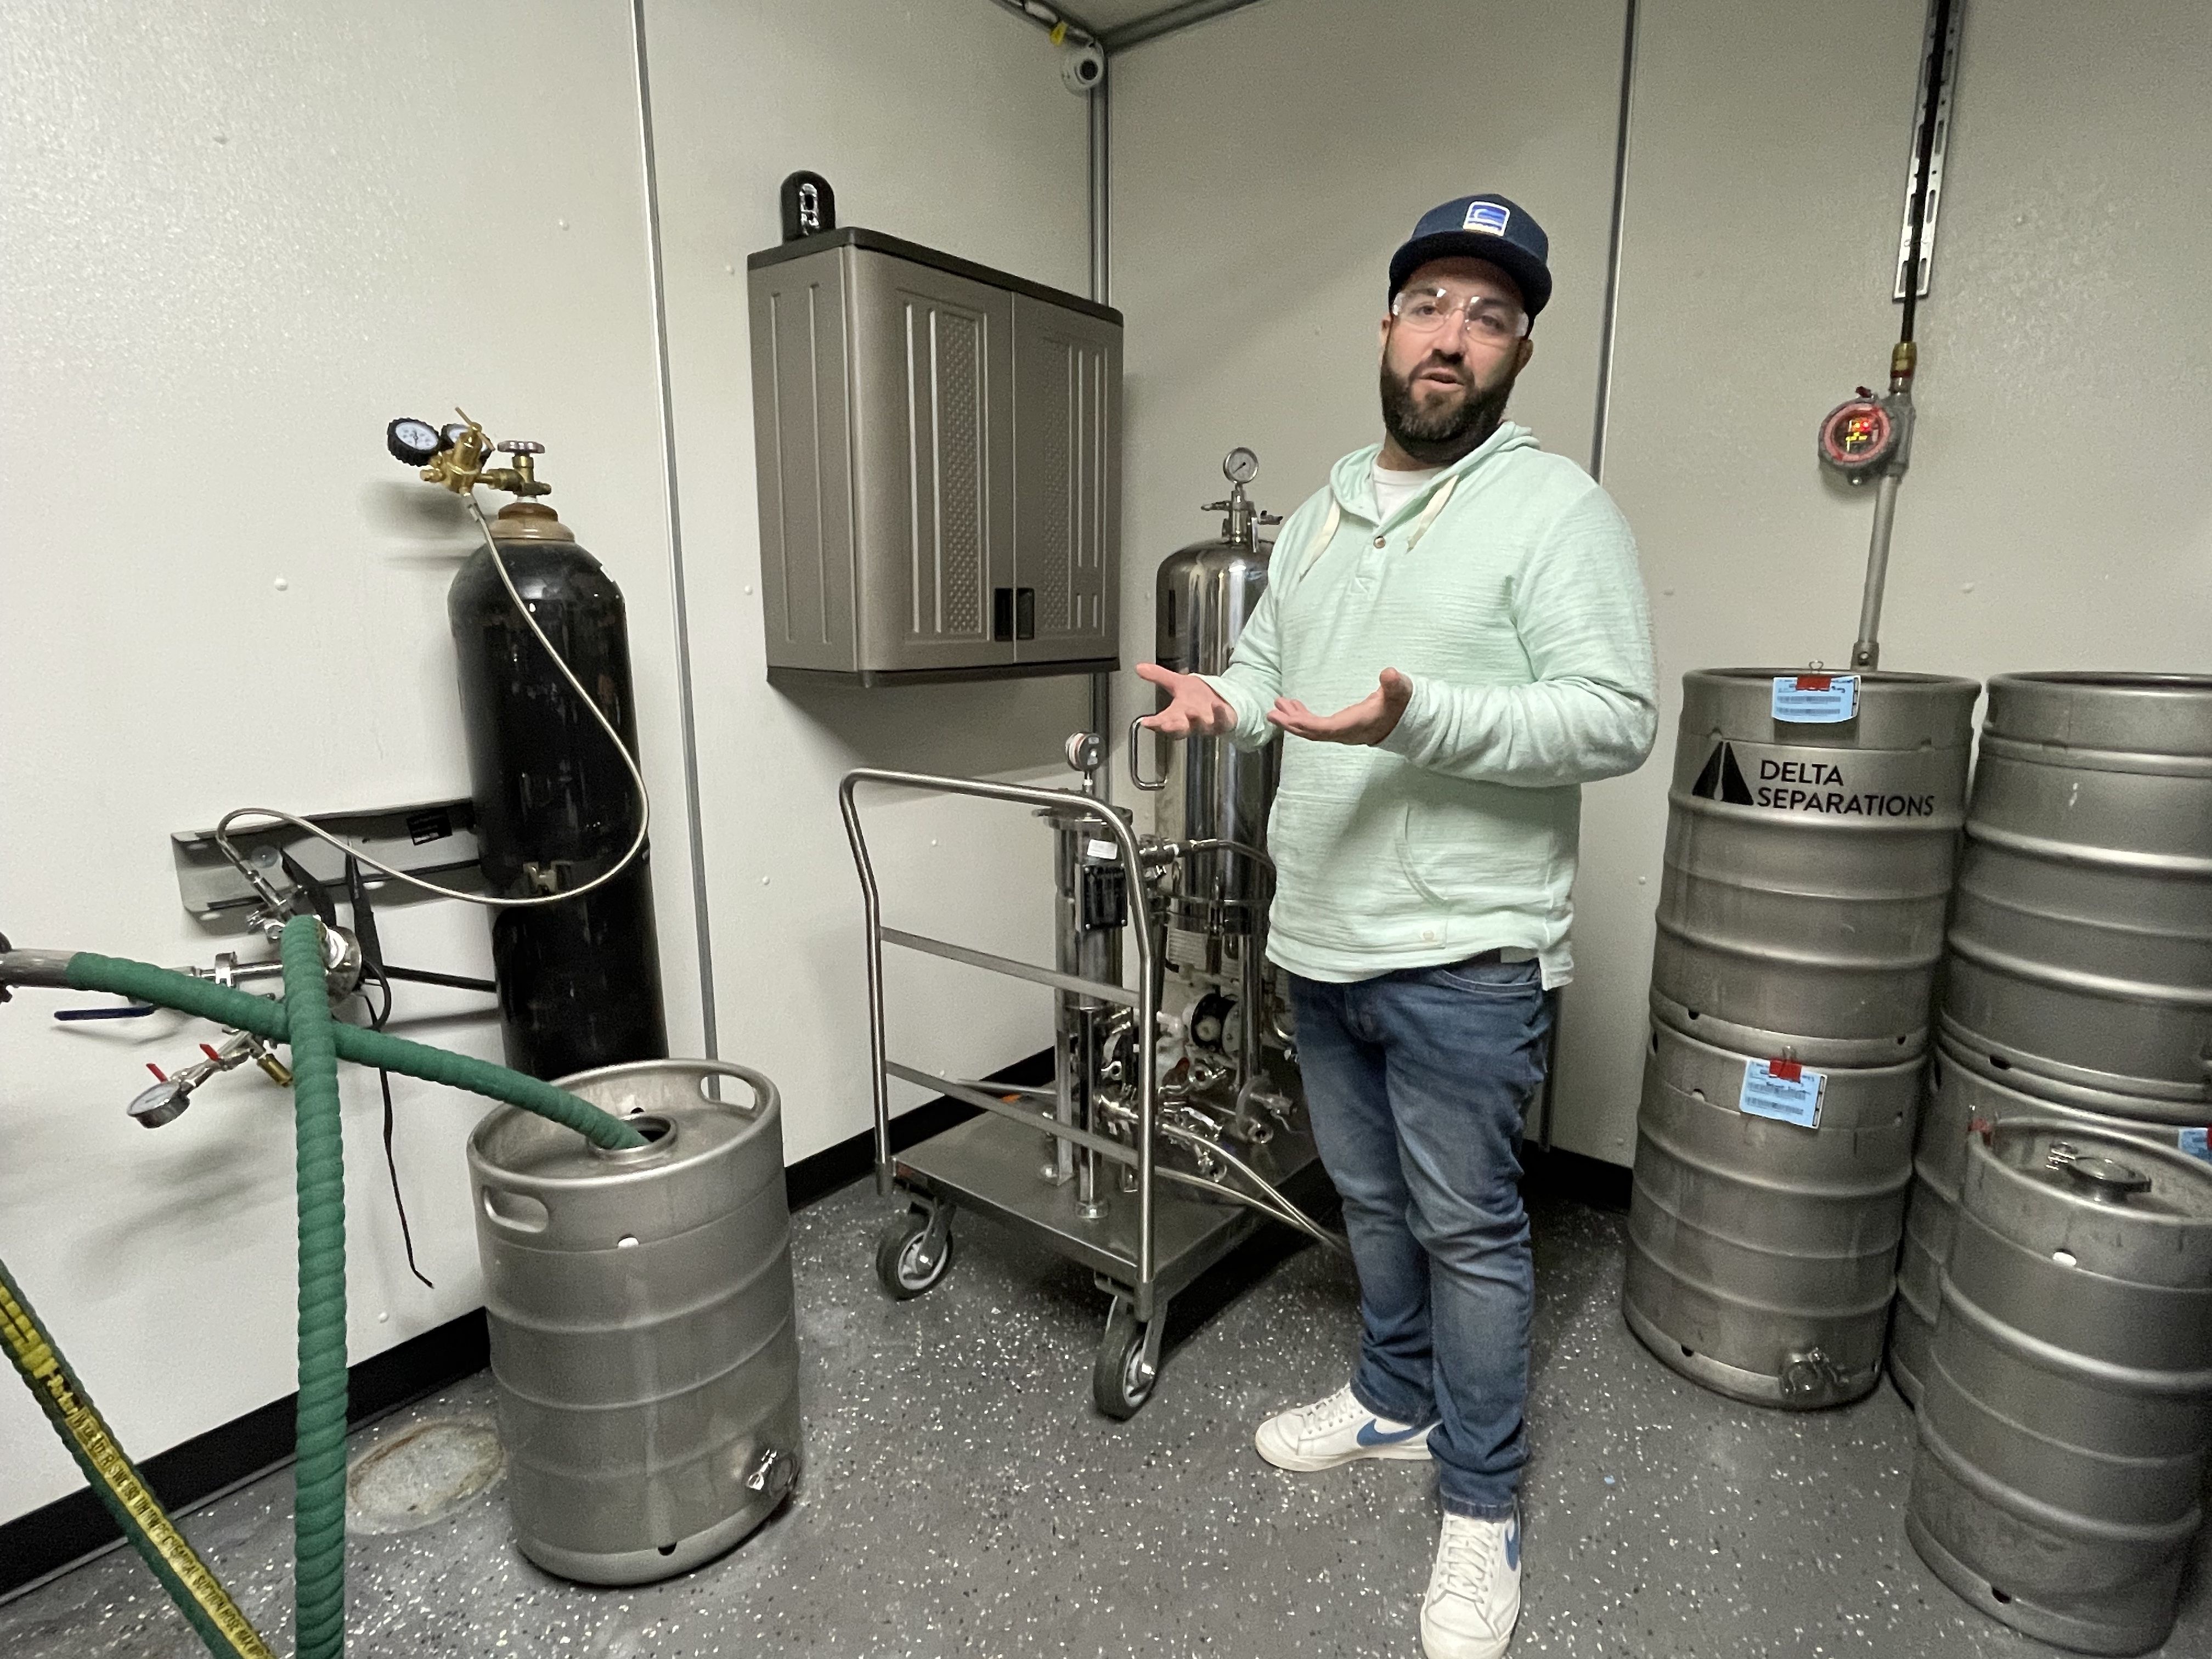 Coast Cannabis co-founder Brian Cusnick stands in front of several barrels where cannabis flower is distilled into cannabis oil.